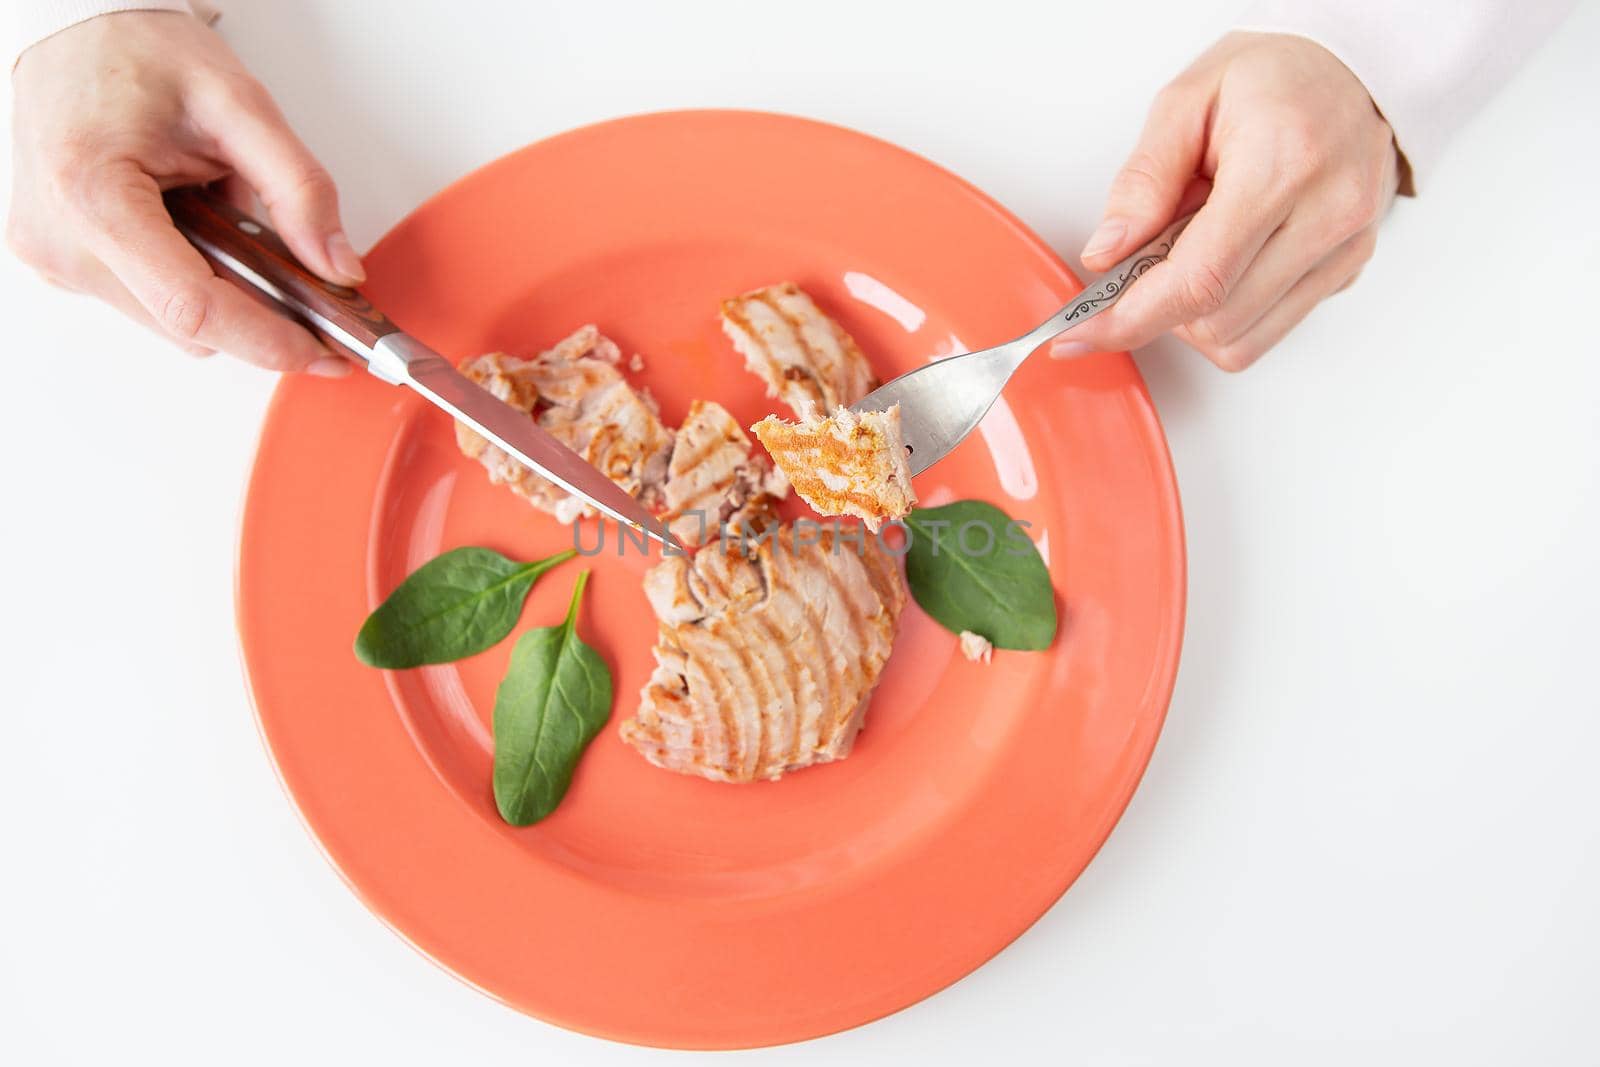 Close-up shot of a juicy delicious grilled tuna steak on a bright coral plate. Delicious and healthy food, proper nutrition. The girl is holding a fork and knife. View from above